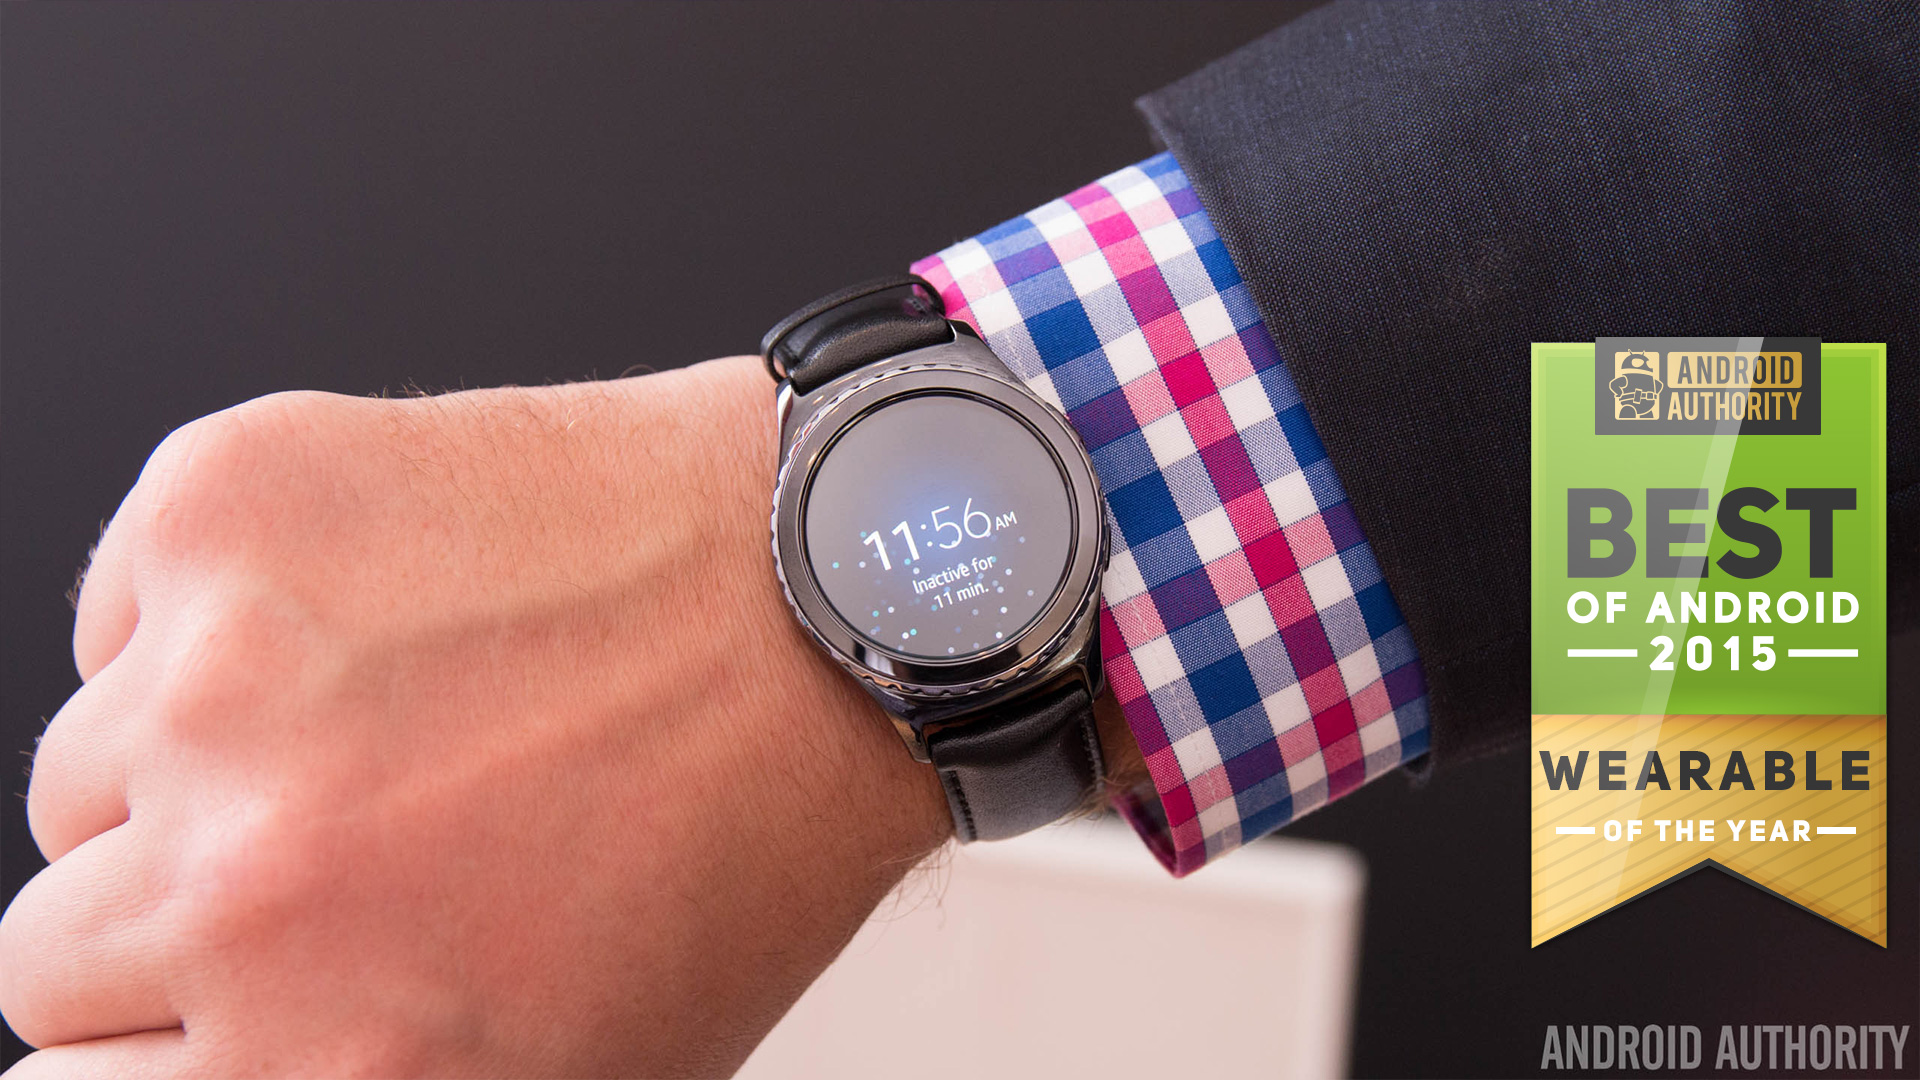 wearable of the year 2015 - Samsung Gear S2